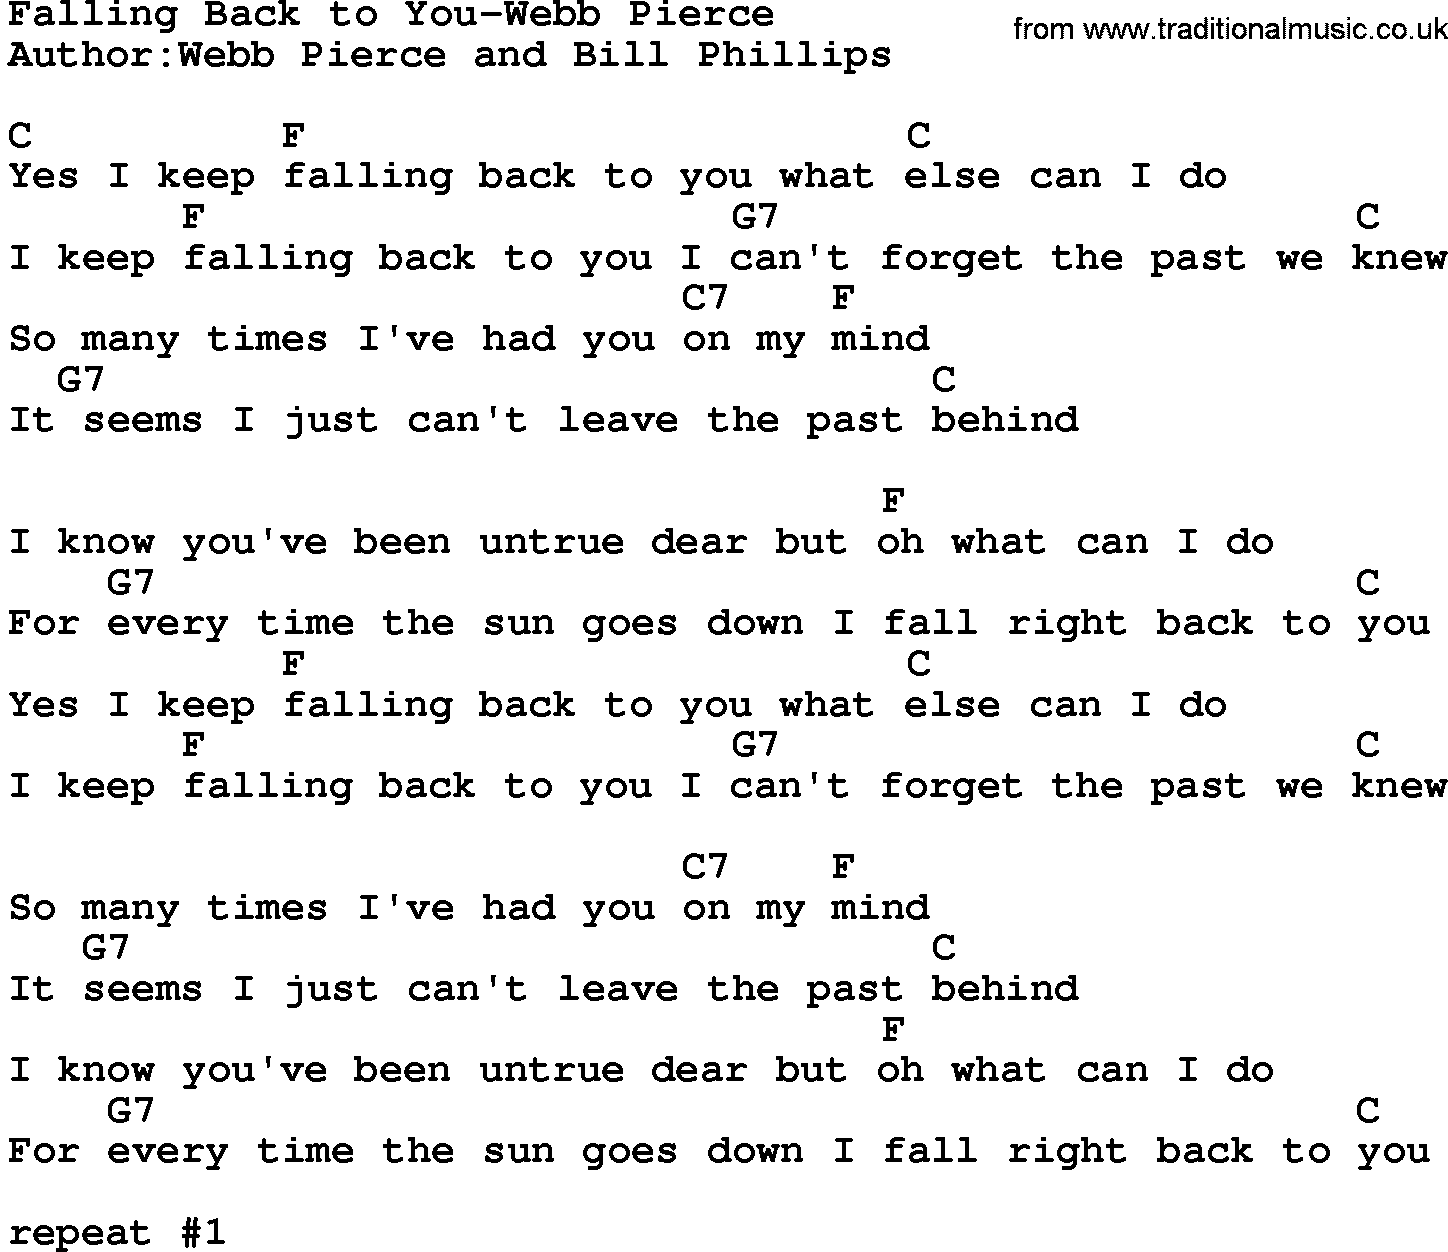 Country music song: Falling Back To You-Webb Pierce lyrics and chords